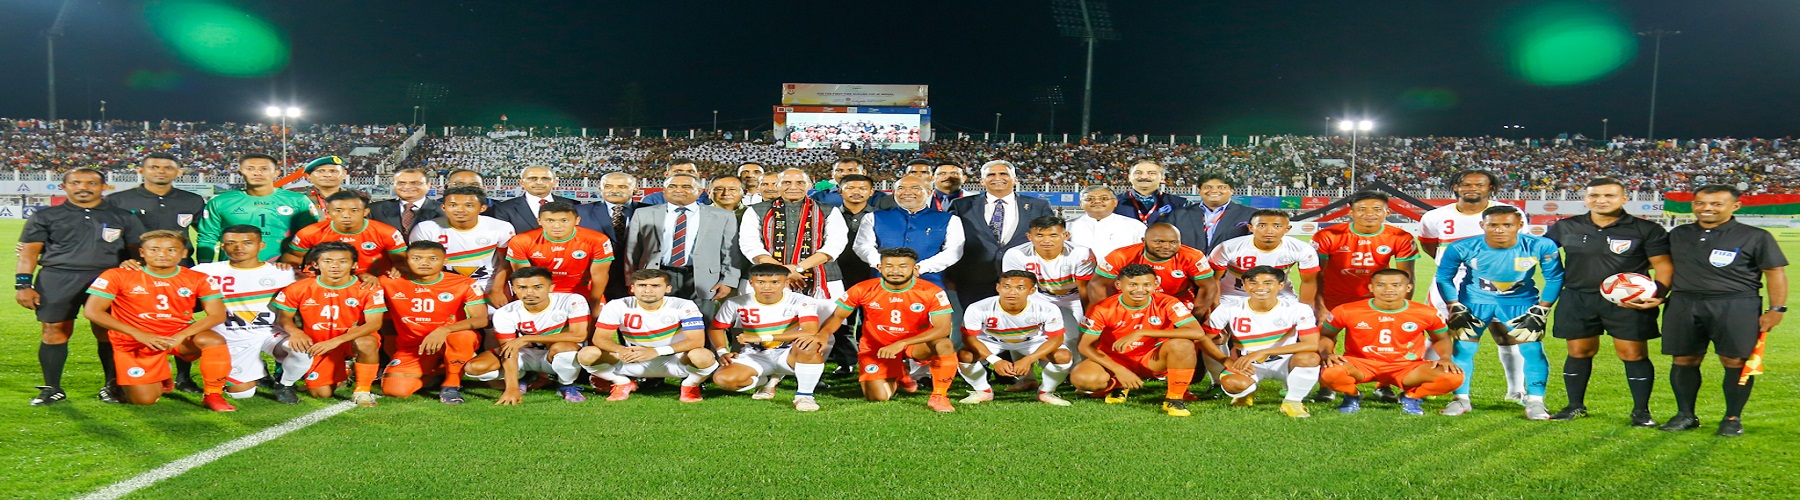 Glimpses of first ever Durand Cup match, played in Manipur between NEROCA FC vs TRAU FC, inaugurated by Raksha Mantri Shri Rajnath Singh at Khuman Lampak Man Stadium in Imphal on August 18, 2022.